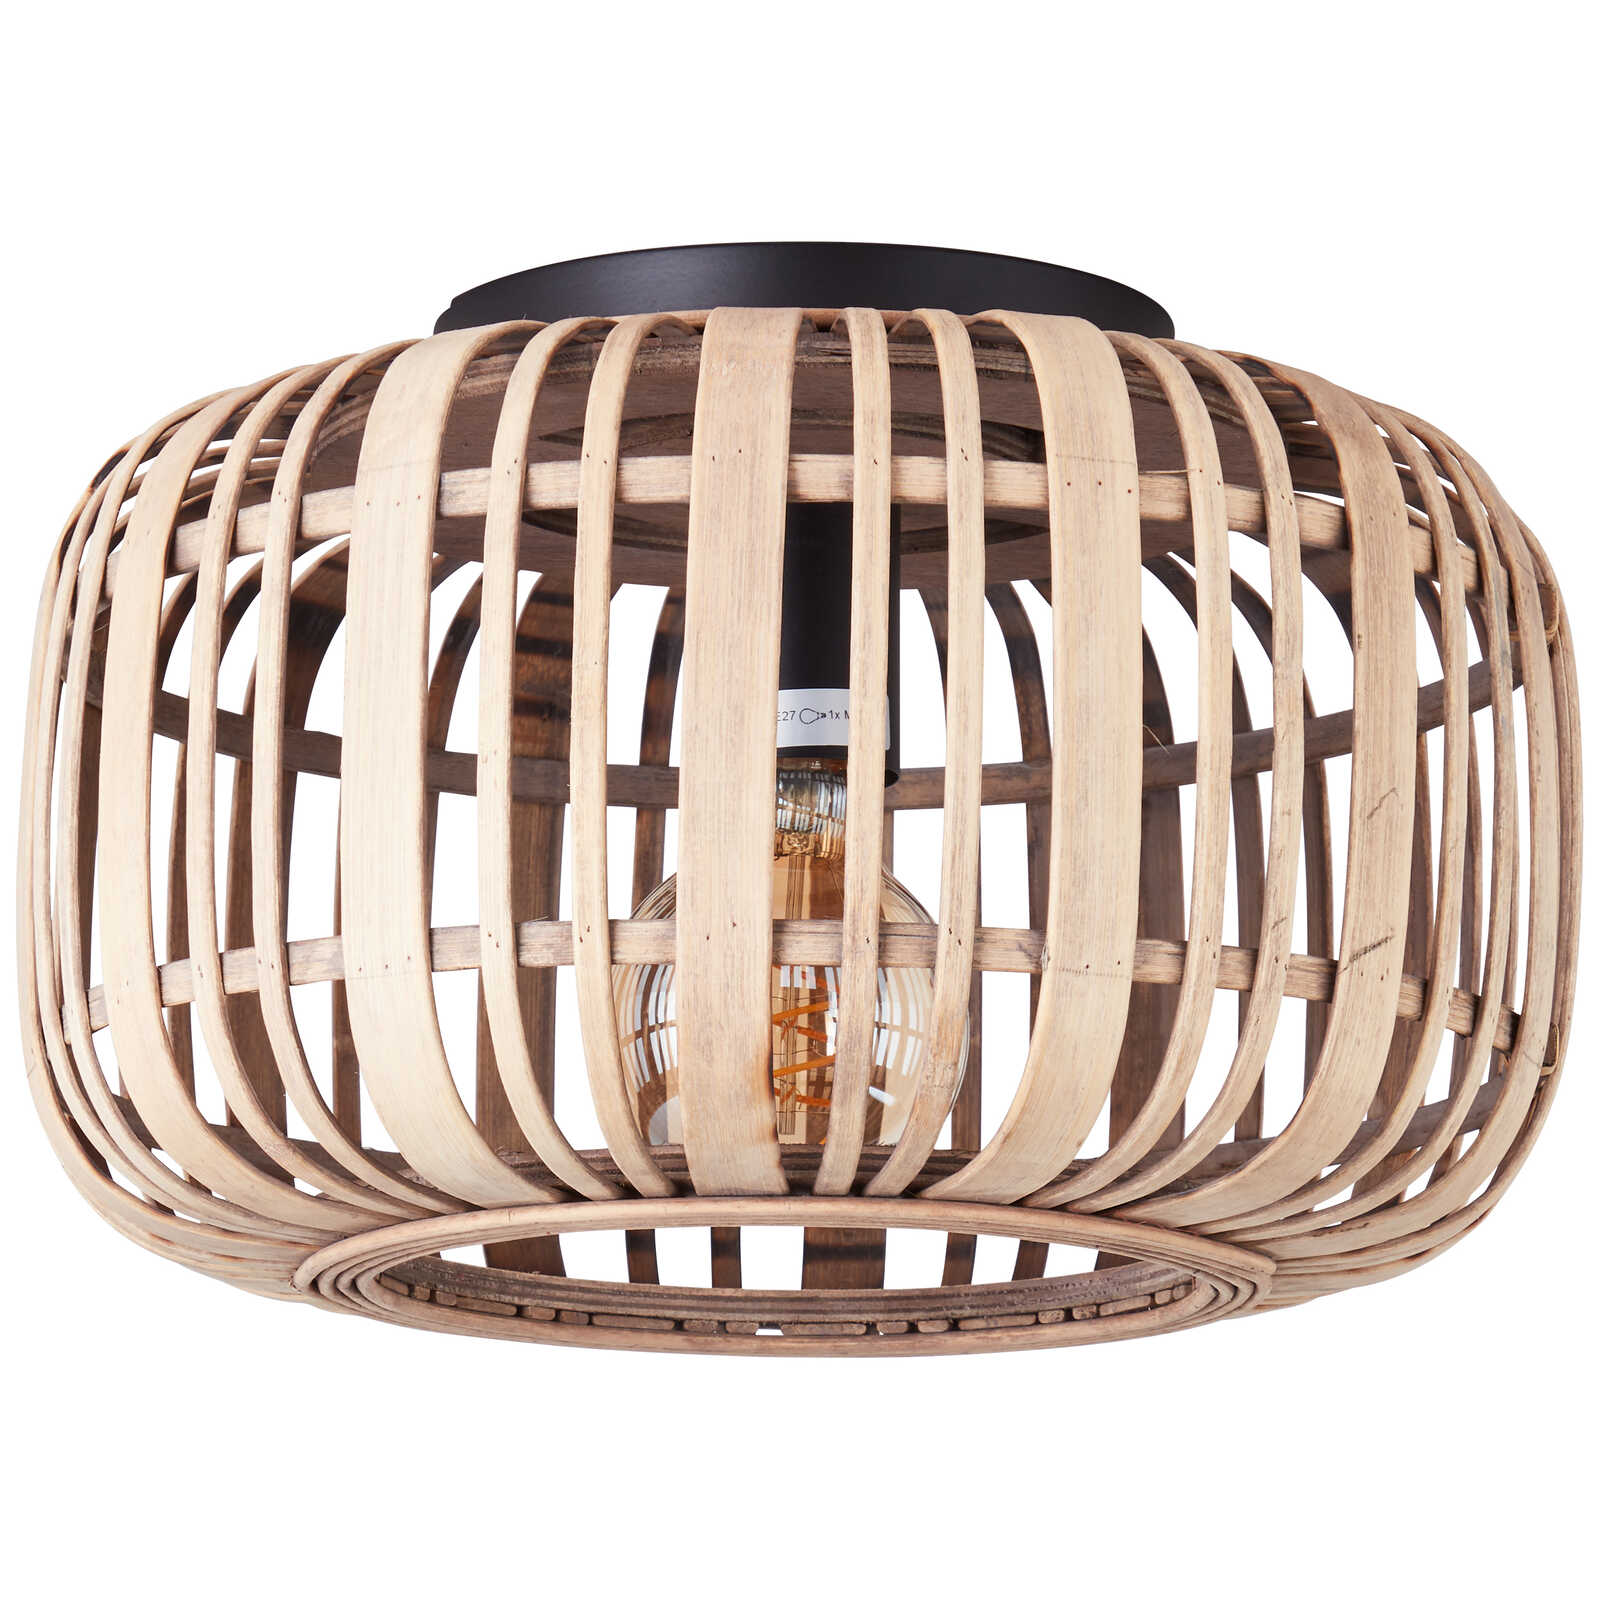             Bamboo ceiling light - Willi 4 - Brown
        